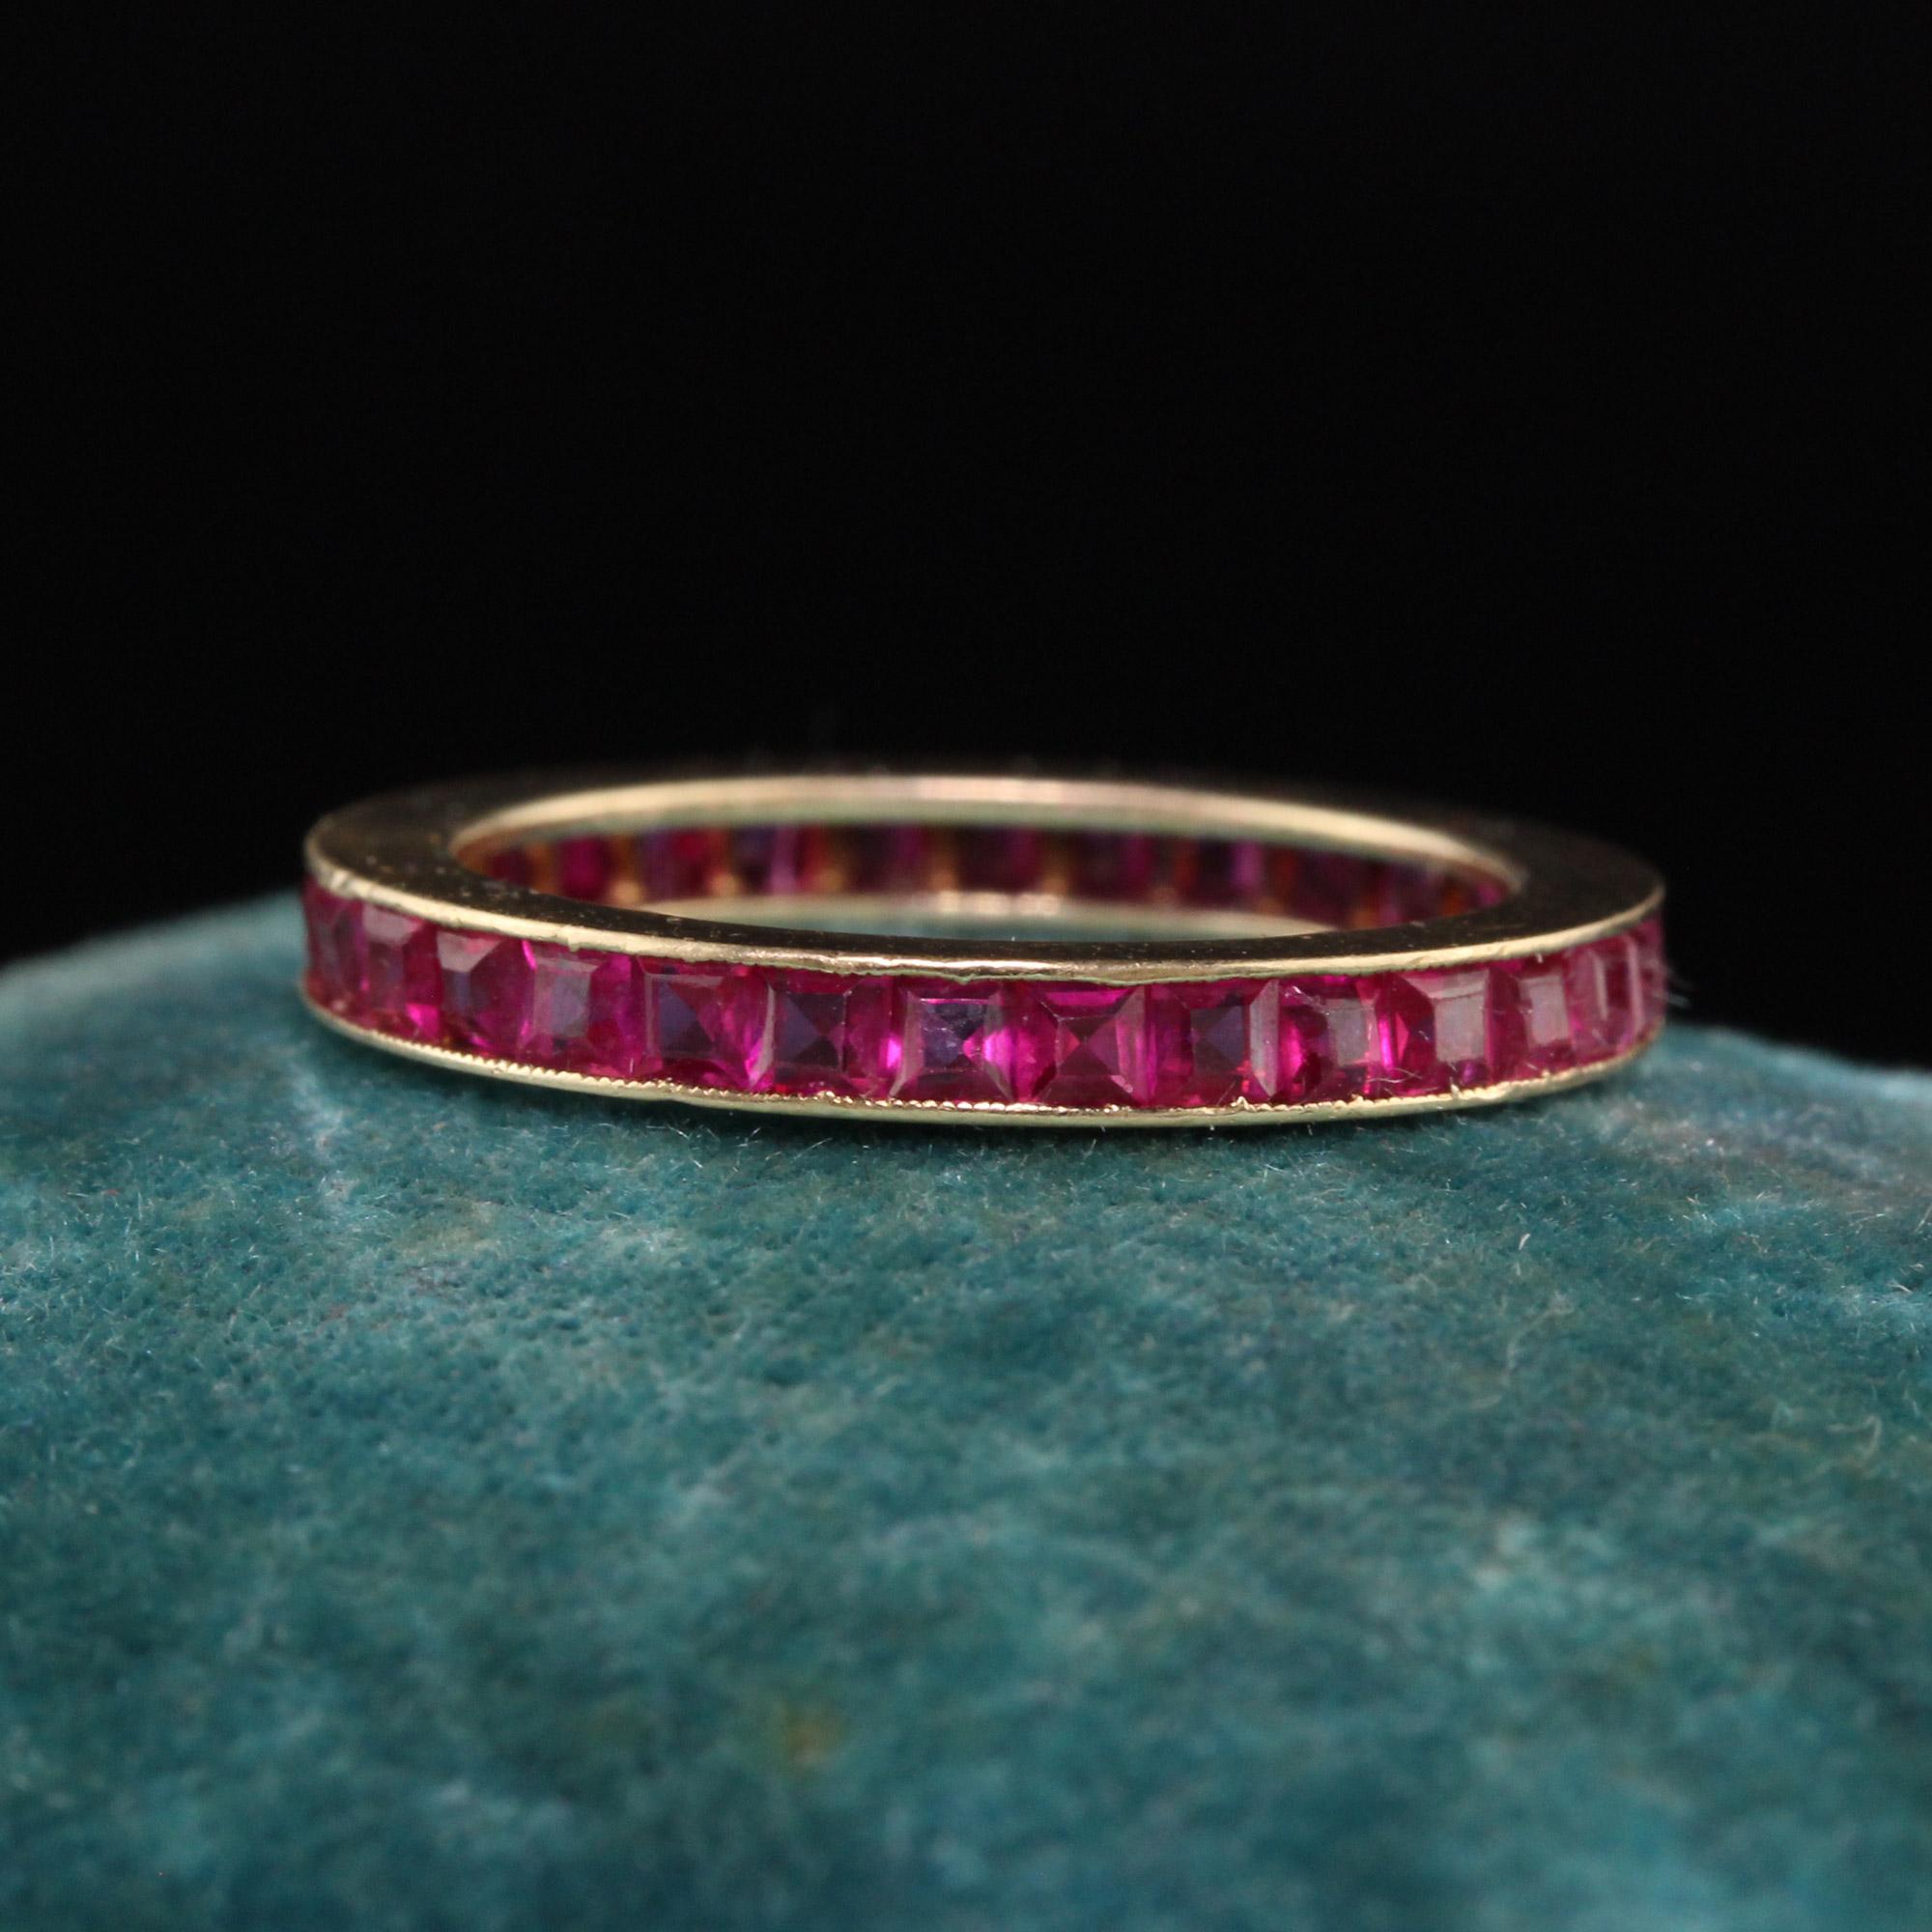 Beautiful Antique Art Deco 14K Yellow Gold Burma Ruby Eternity Band - Size 4 3/4. This gorgeous band has square burmese rubies set all the way around the band and is in good condition. The rubies are very bright and glow.

Item #R1056

Metal: 14K